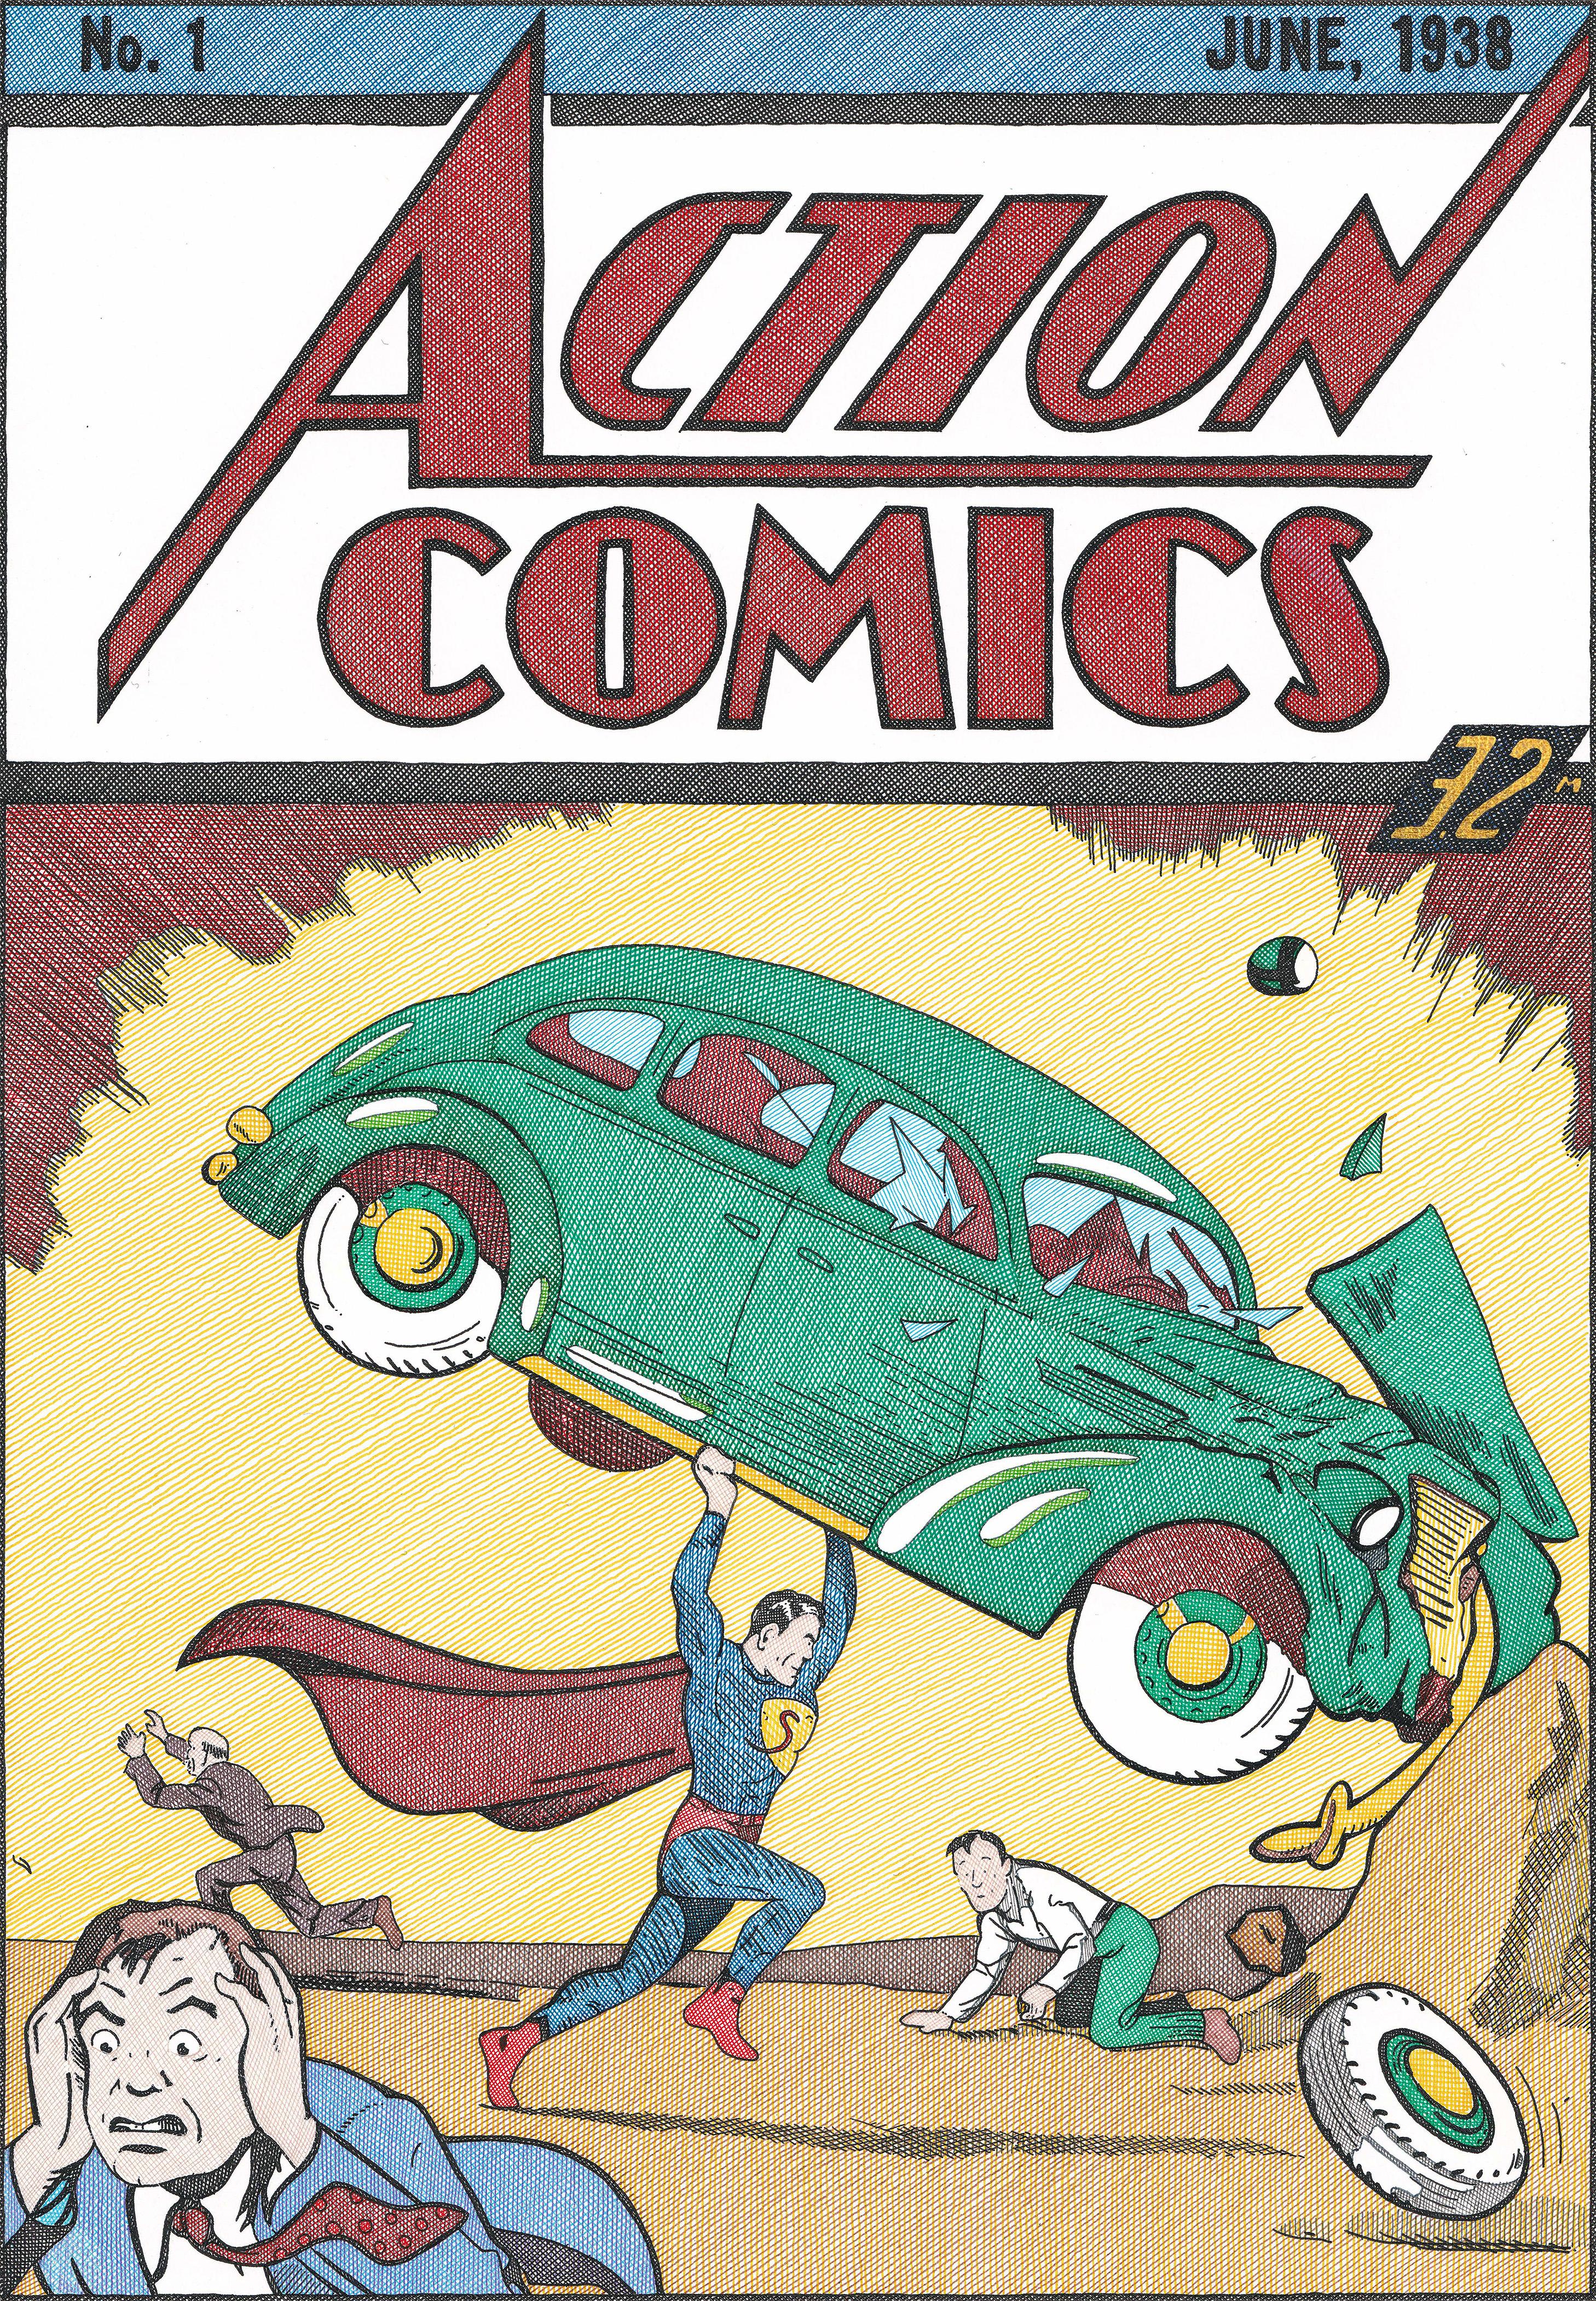 3.2 M (ACTION COMICS), 2023  by Rodrigo Spinel 
Chinese ink on Fabriano paper 250 g.
Frame size: 43 cm H x 34 cm W x 3 cm D
Image size: 30 cm H x 21 cm W 
Unique
Ivory Wood Brown Frame

As a reflection on the value we give to objects, this series